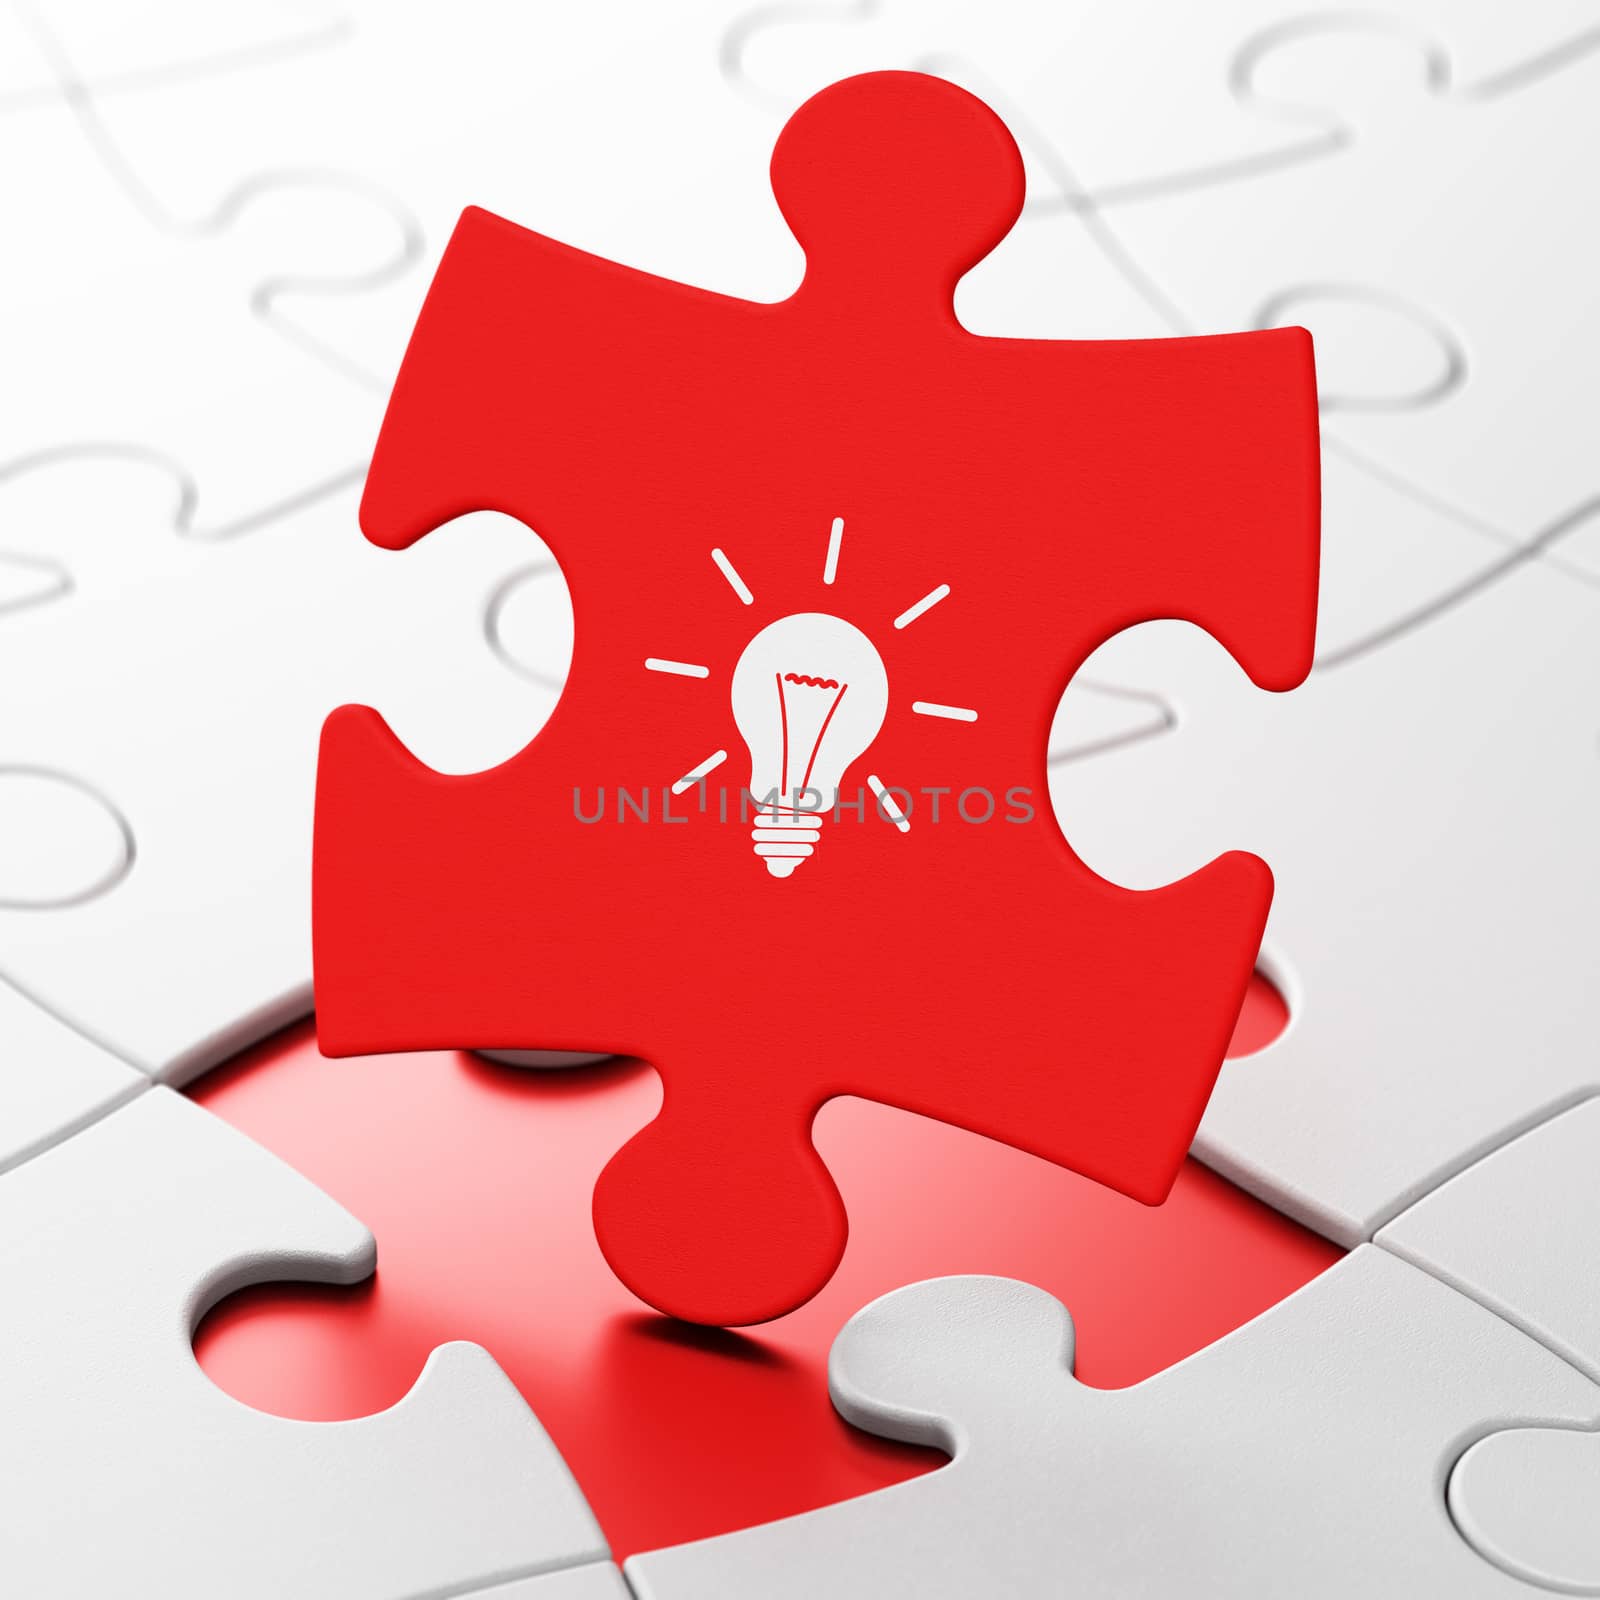 Business concept: Light Bulb on Red puzzle pieces background, 3d render